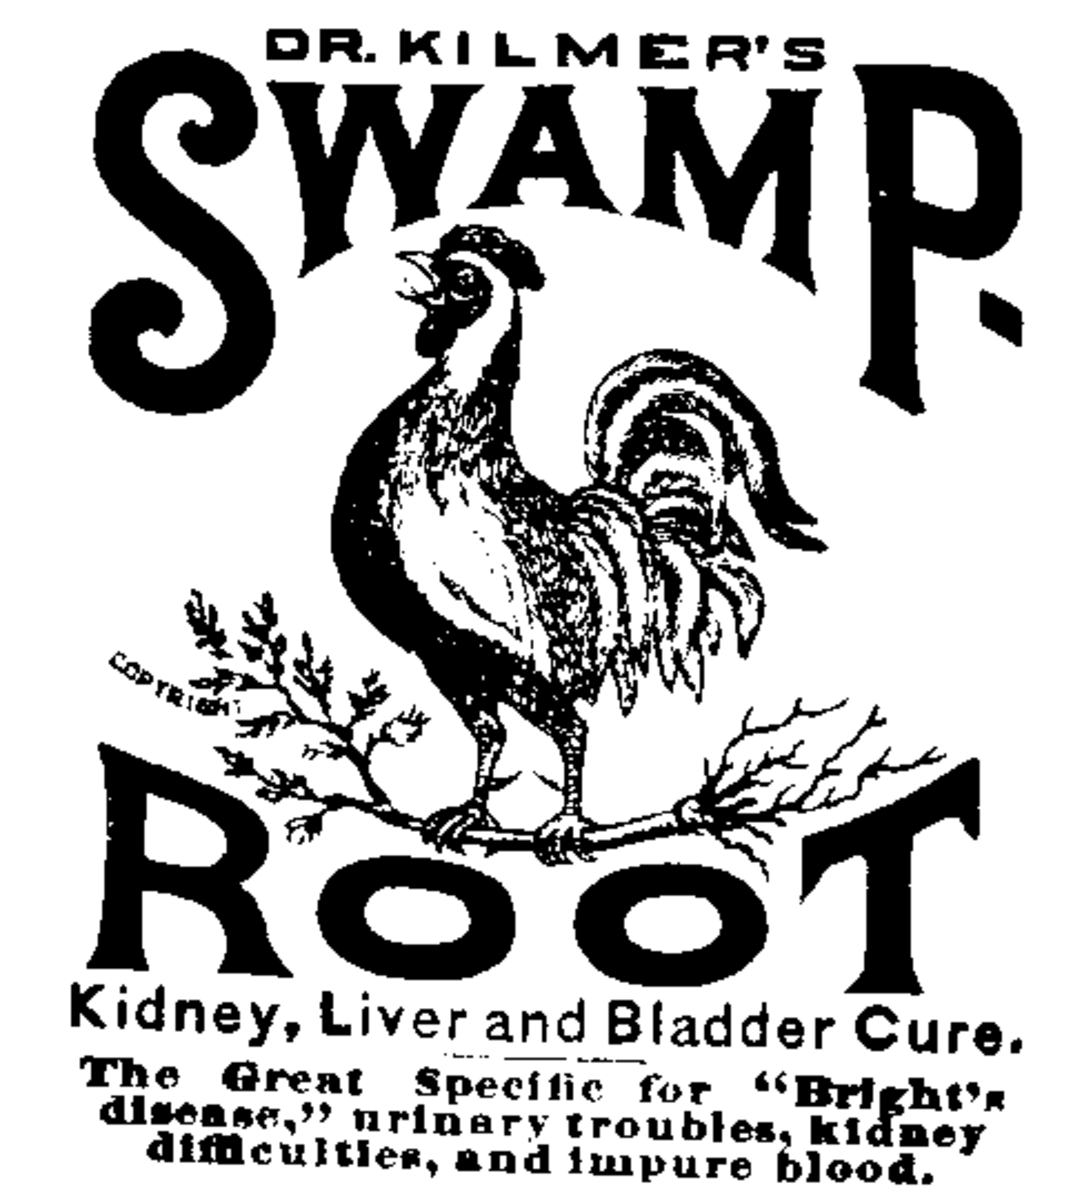 The most successful old patent medicines , such as "Swamp Root" claimed to cure multiple health problems.